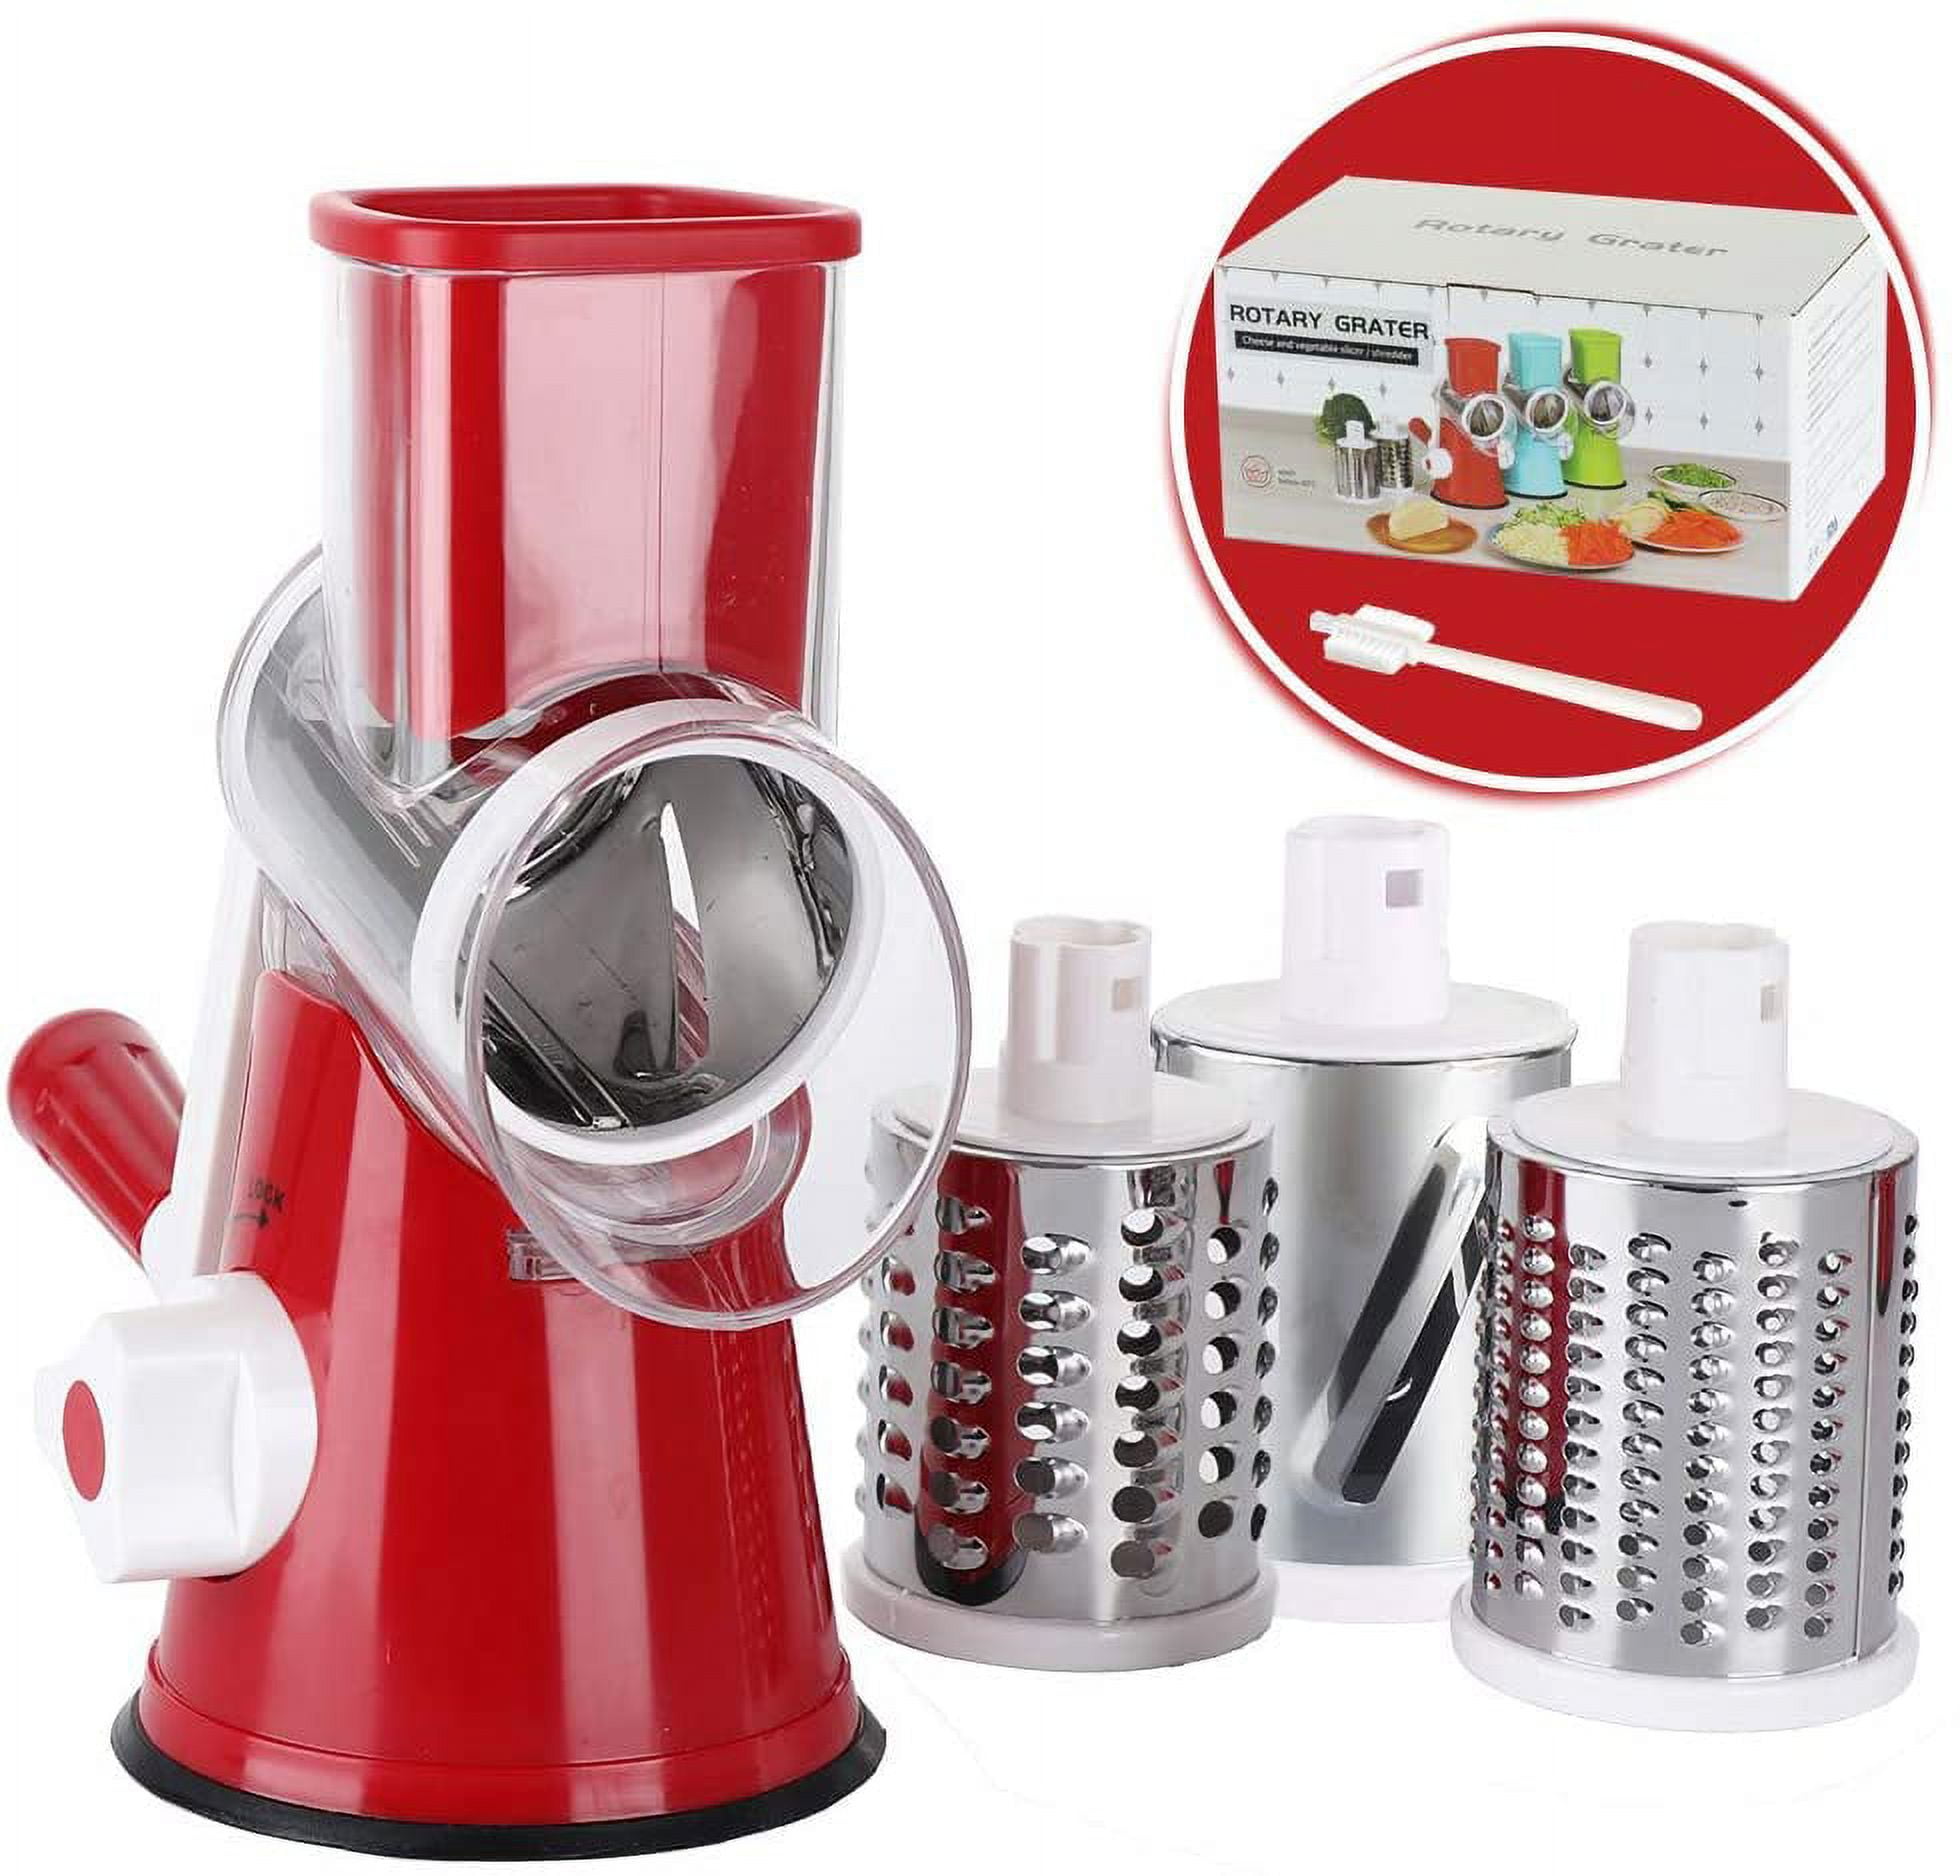 Cambom Rotary Cheese Grater Shredder Chopper Round Tumbling Box Mandoline  Slicer Nut Grinder Vegetable Slicer, Hash Brown, Potato with Strong Suction  Base 